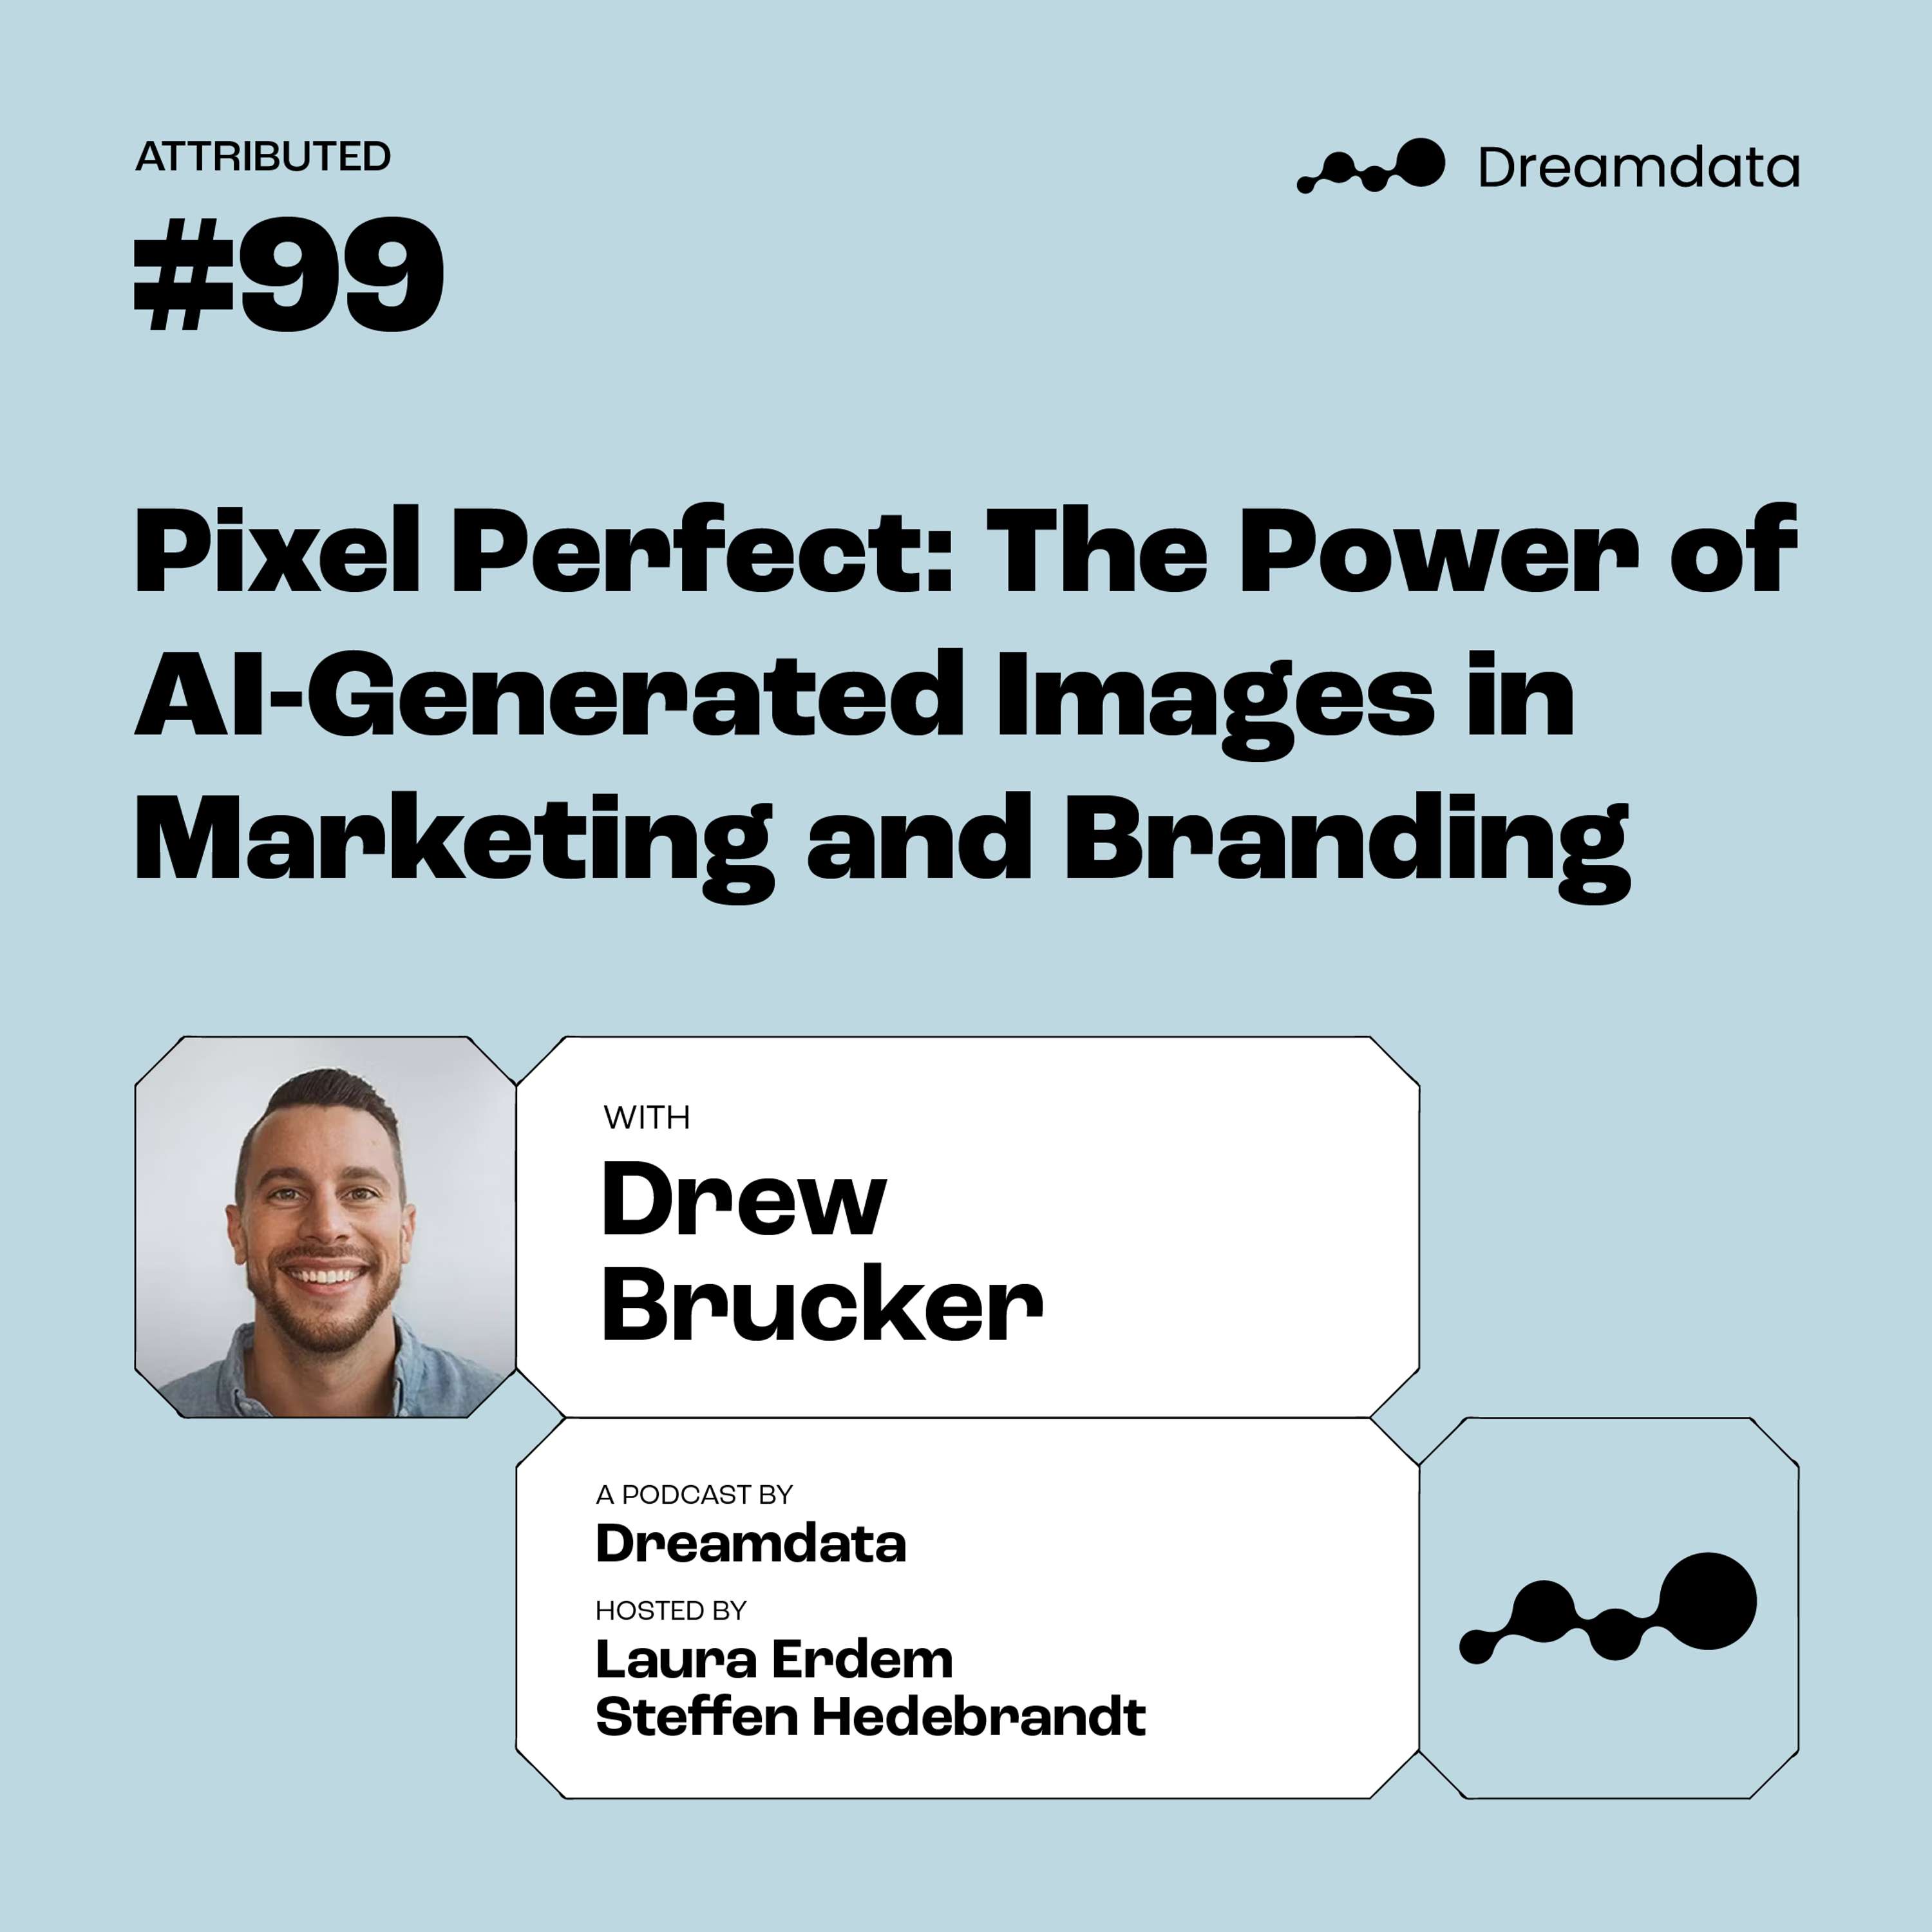 Pixel Perfect: The Power of AI-Generated Images in Marketing and Branding